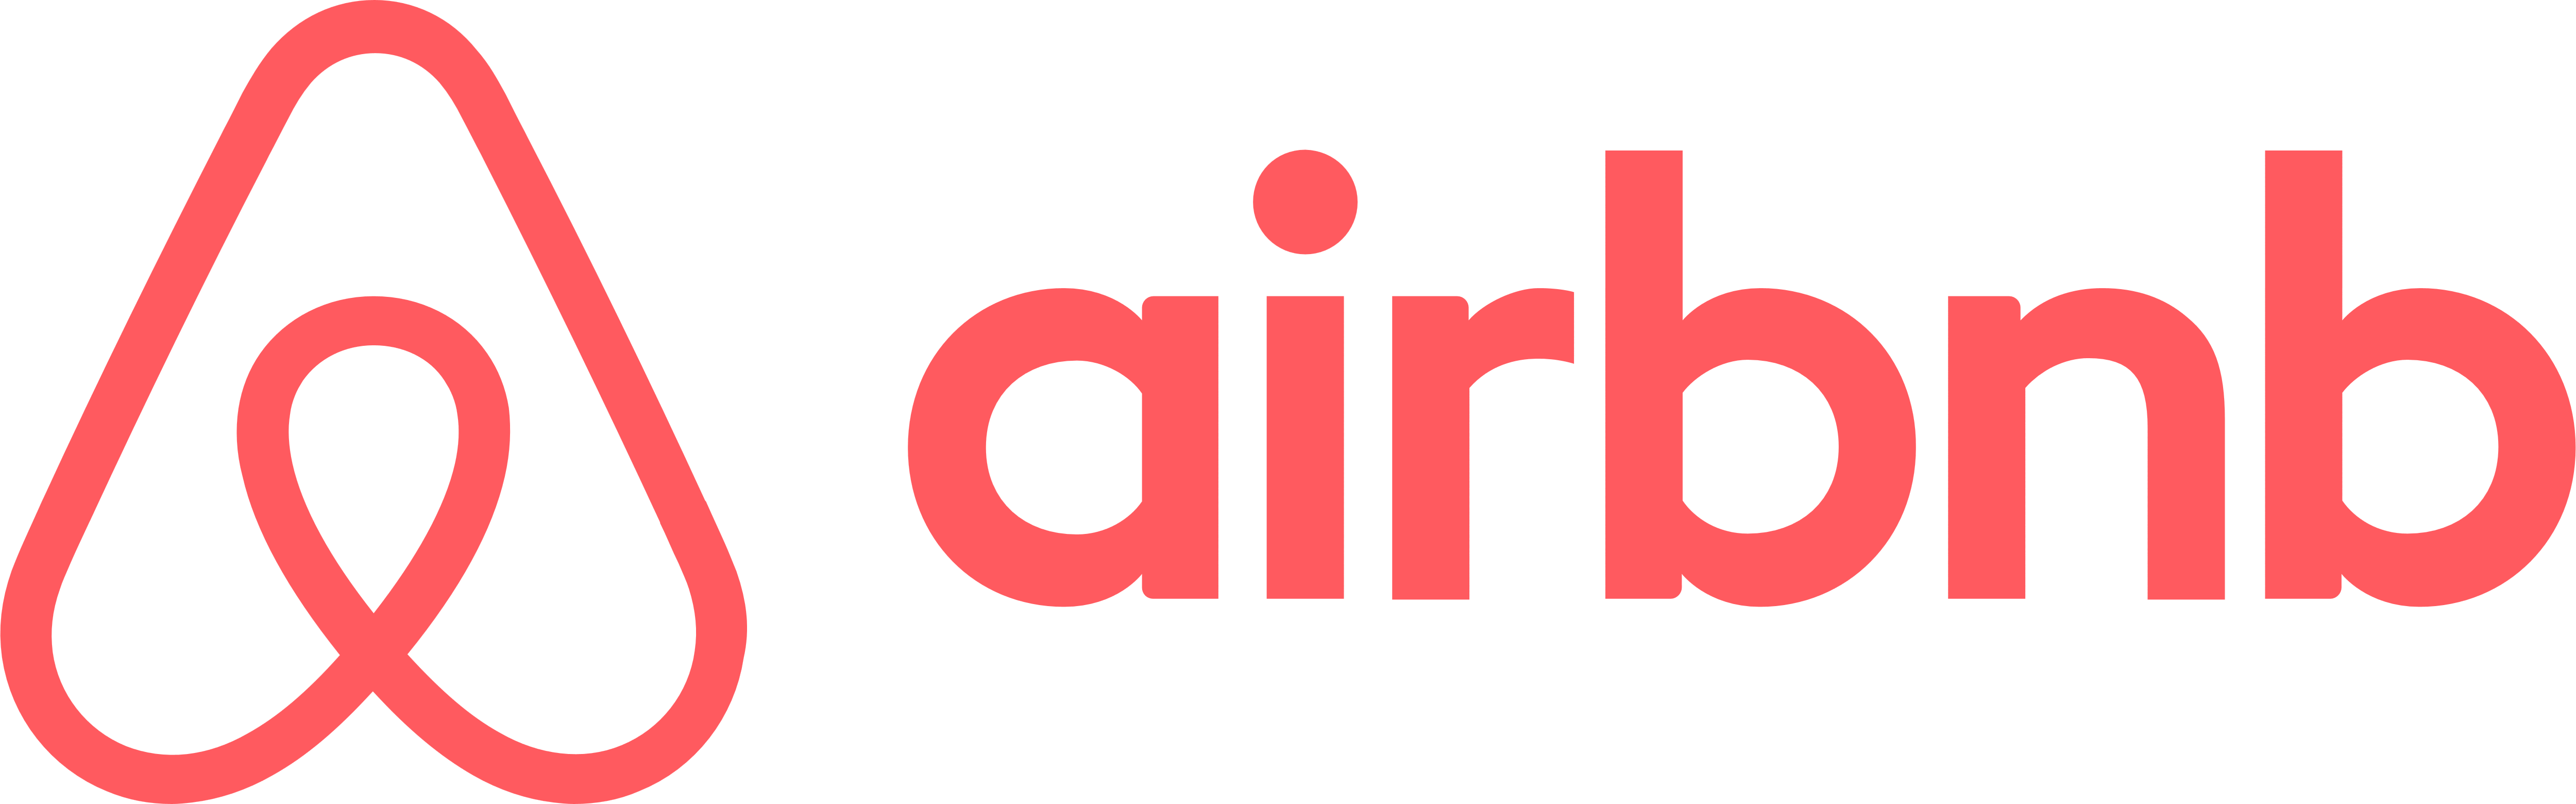 The company airbnb logo which is an icon and text